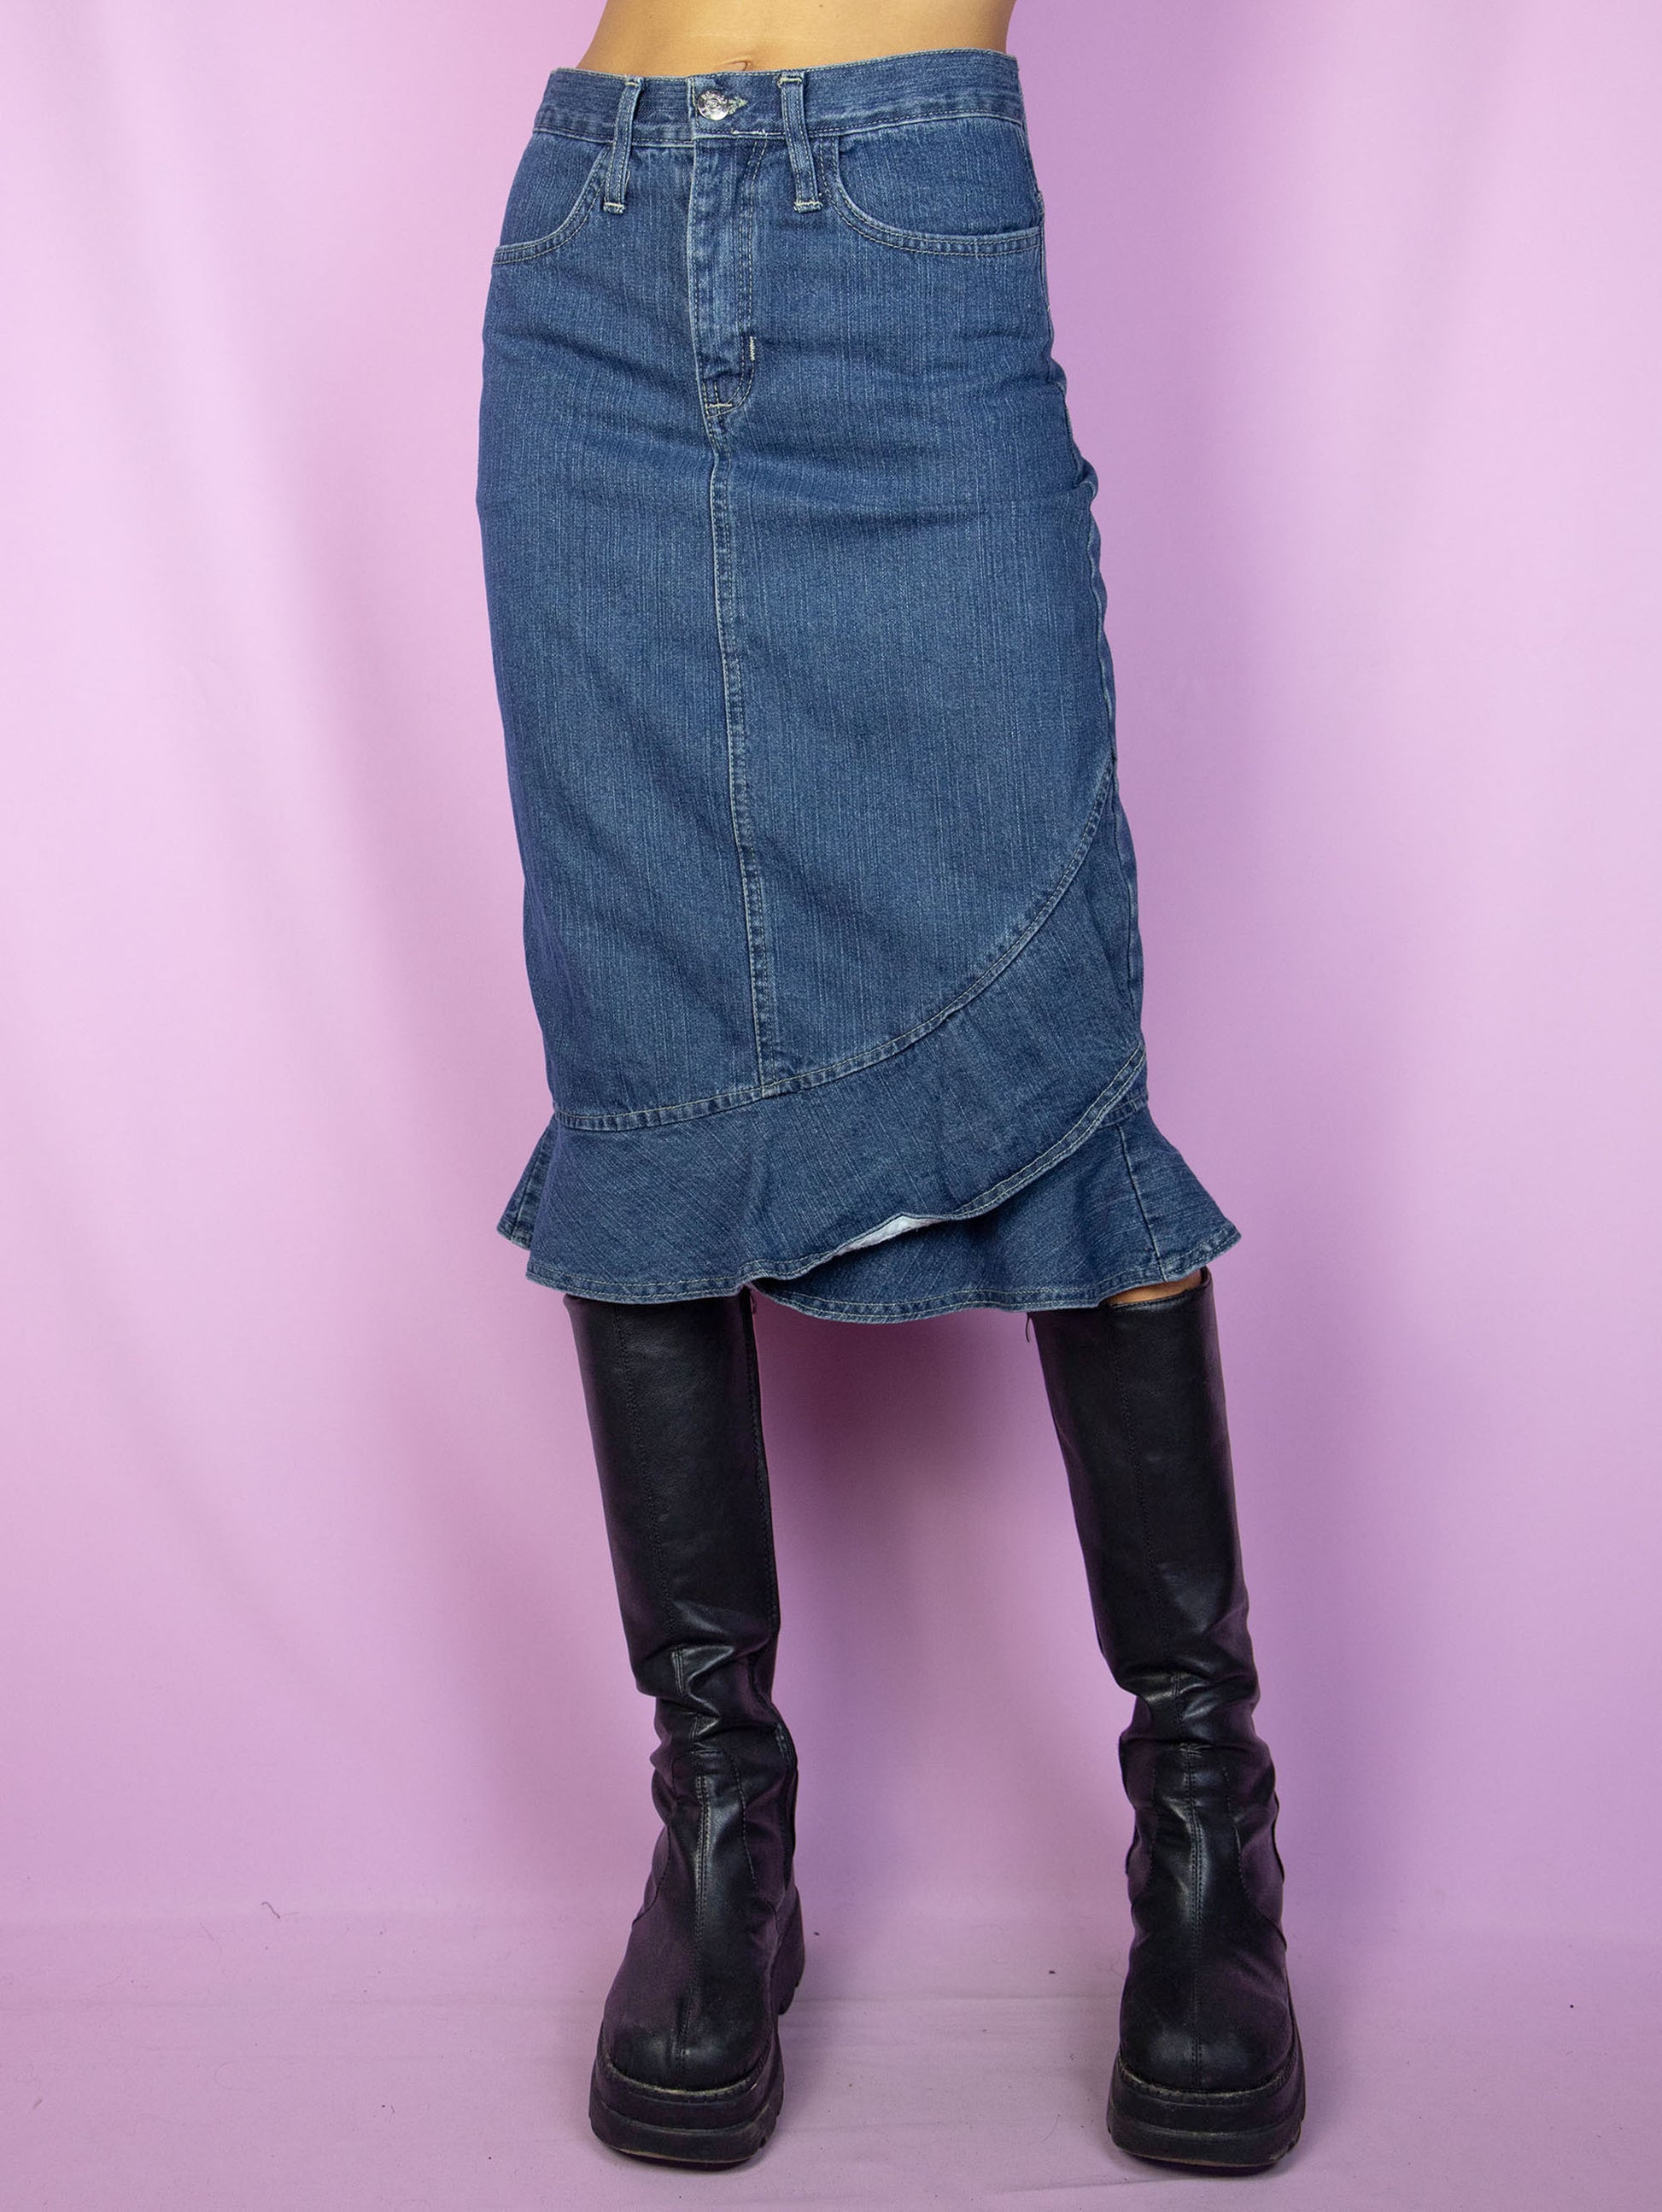 The Y2K Trumpet Denim Midi Skirt is a vintage 2000s jean skirt with a ruffled hem, back slit, pockets and zipper closure.